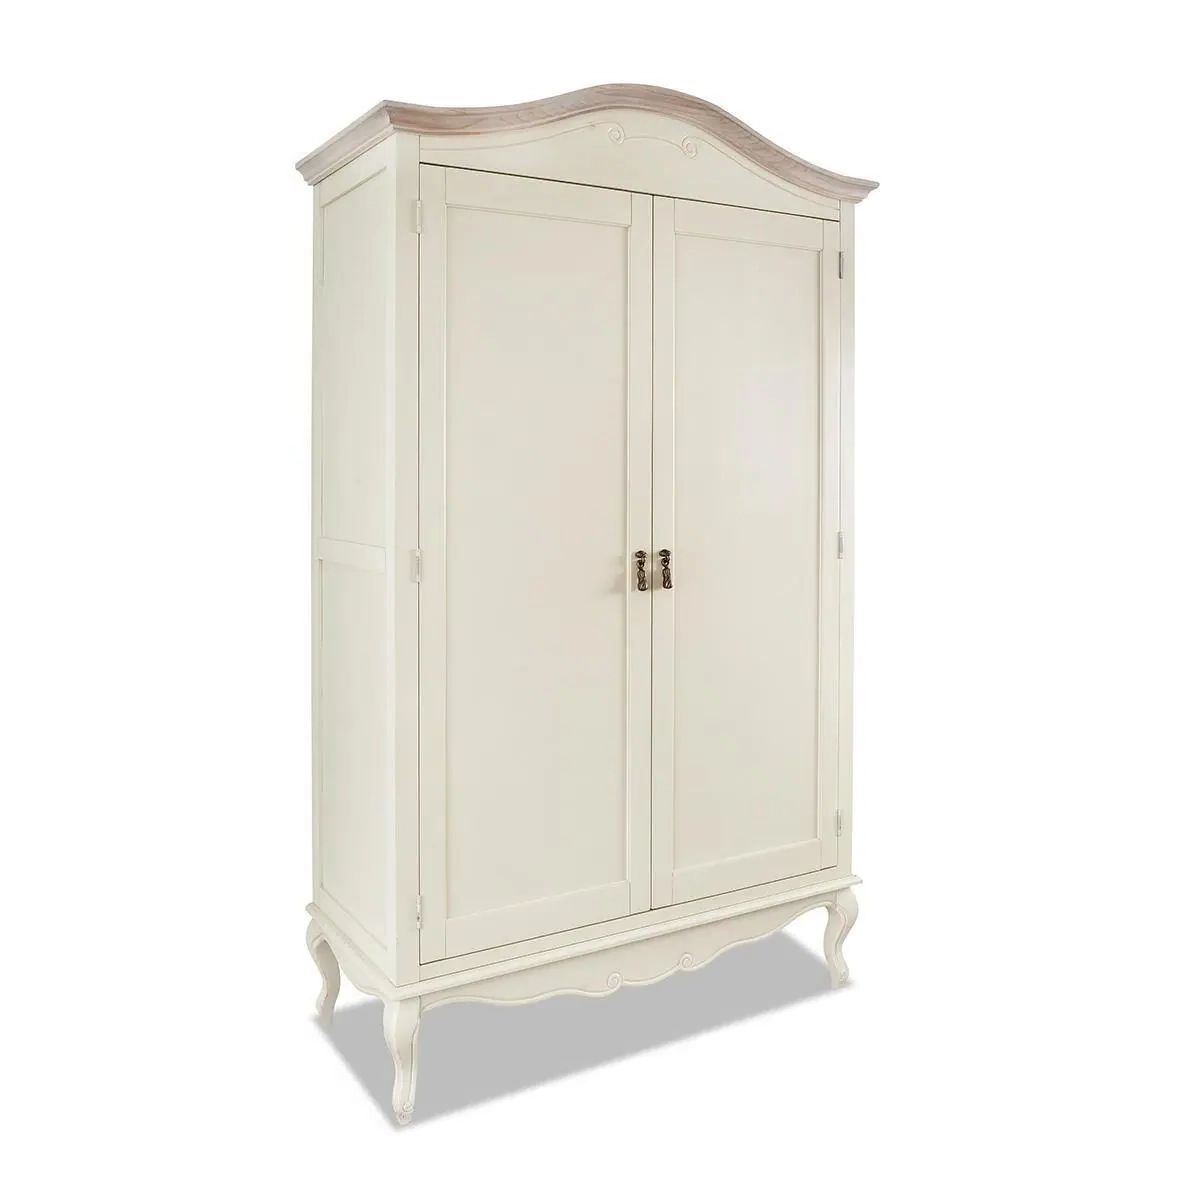 Cream Double Wardrobe French Large 2 Door Shabby Chic Bedroom Furniture  Juliette | Ebay Regarding Large Shabby Chic Wardrobes (View 13 of 20)